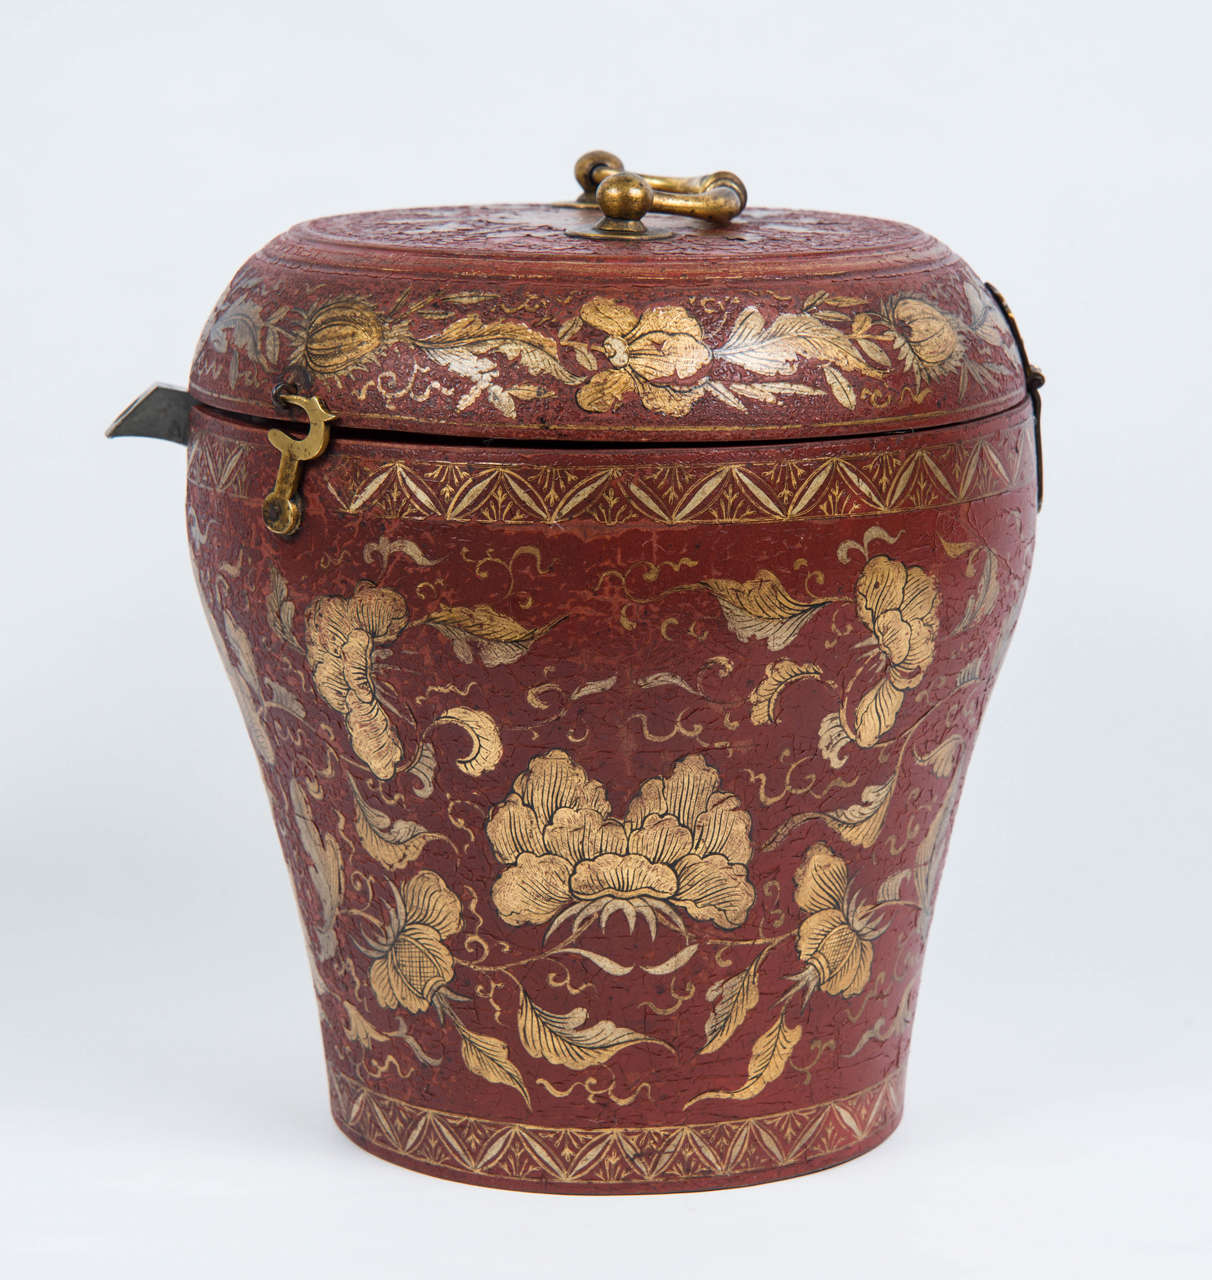 Red lacquer box with a gilt decor of flowers and leaves containing a pewter teapot protected by a padded silk cover.
Small carrying handle on the lid, two small locking hooks. The neck of the pot appears in a small opening made on the front